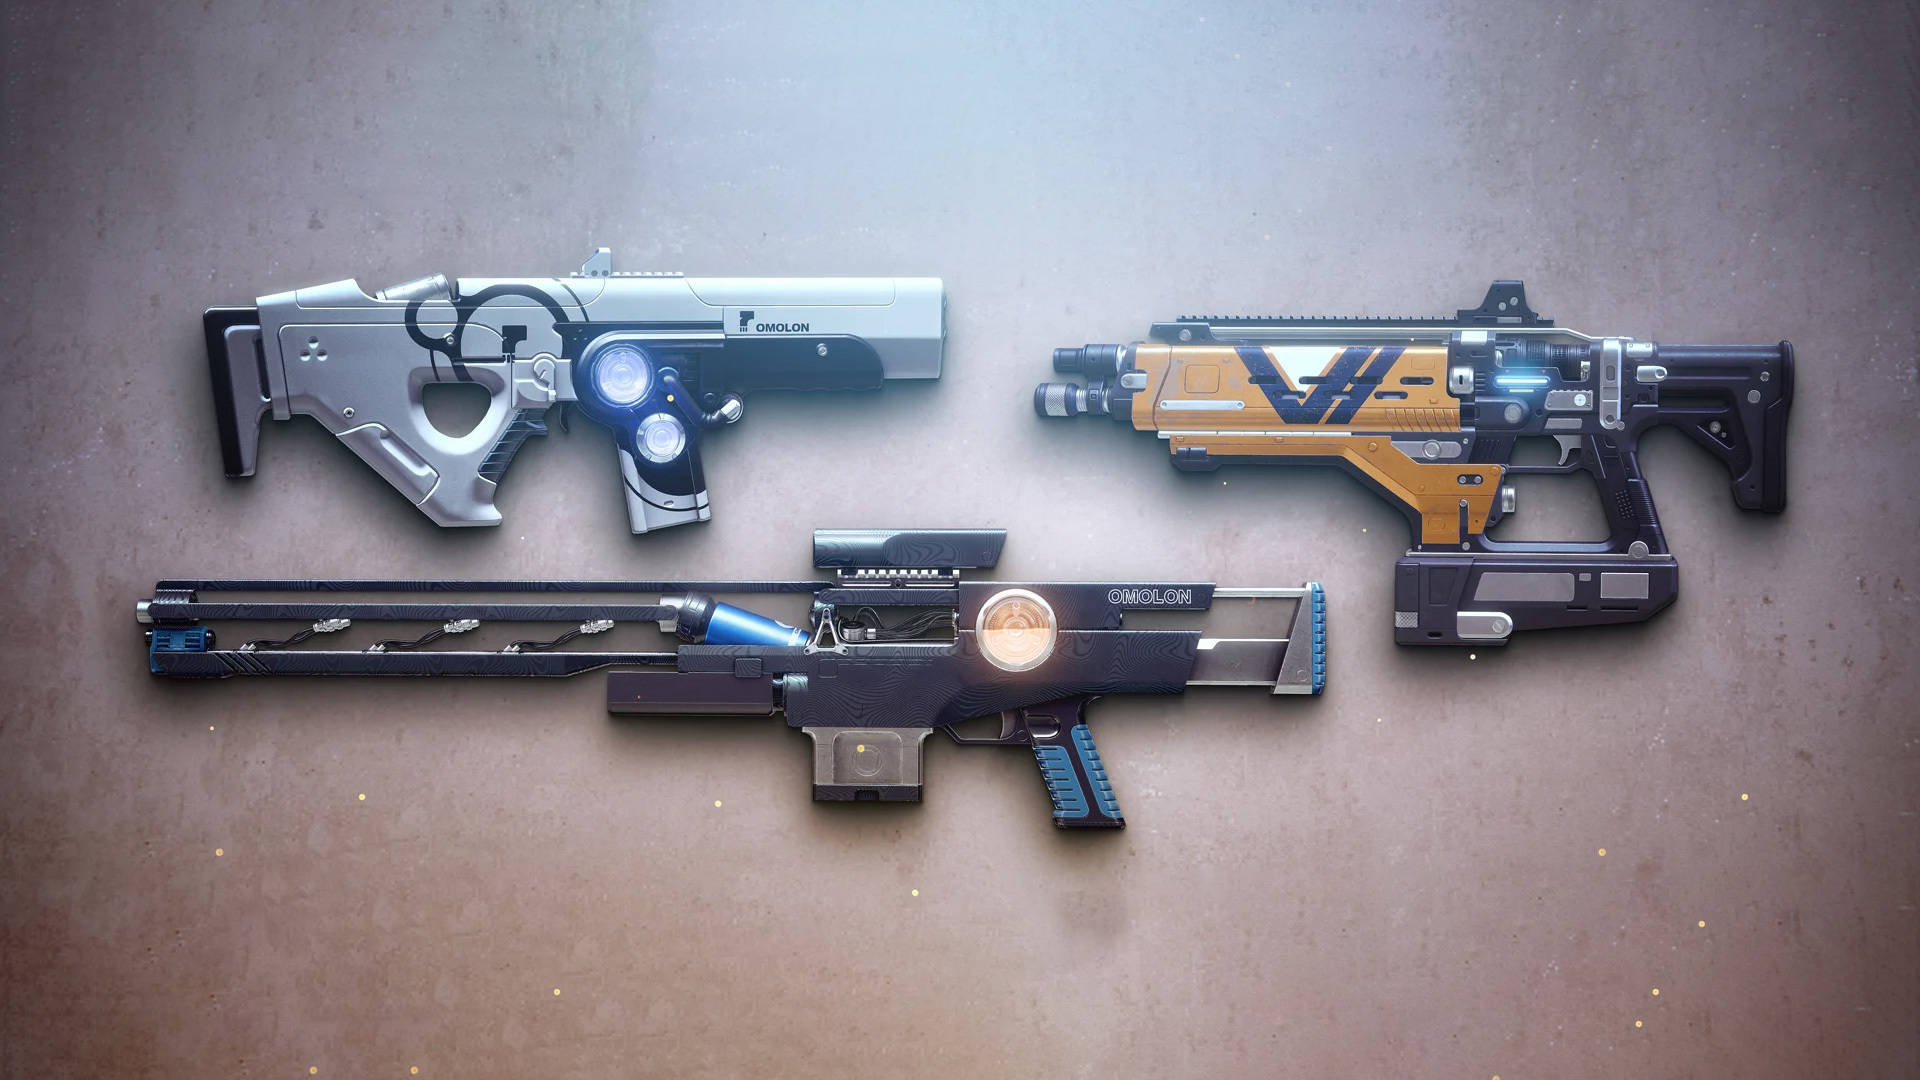 Destiny 2 Nightfall weapons – What is the Nightfall weapon this week?